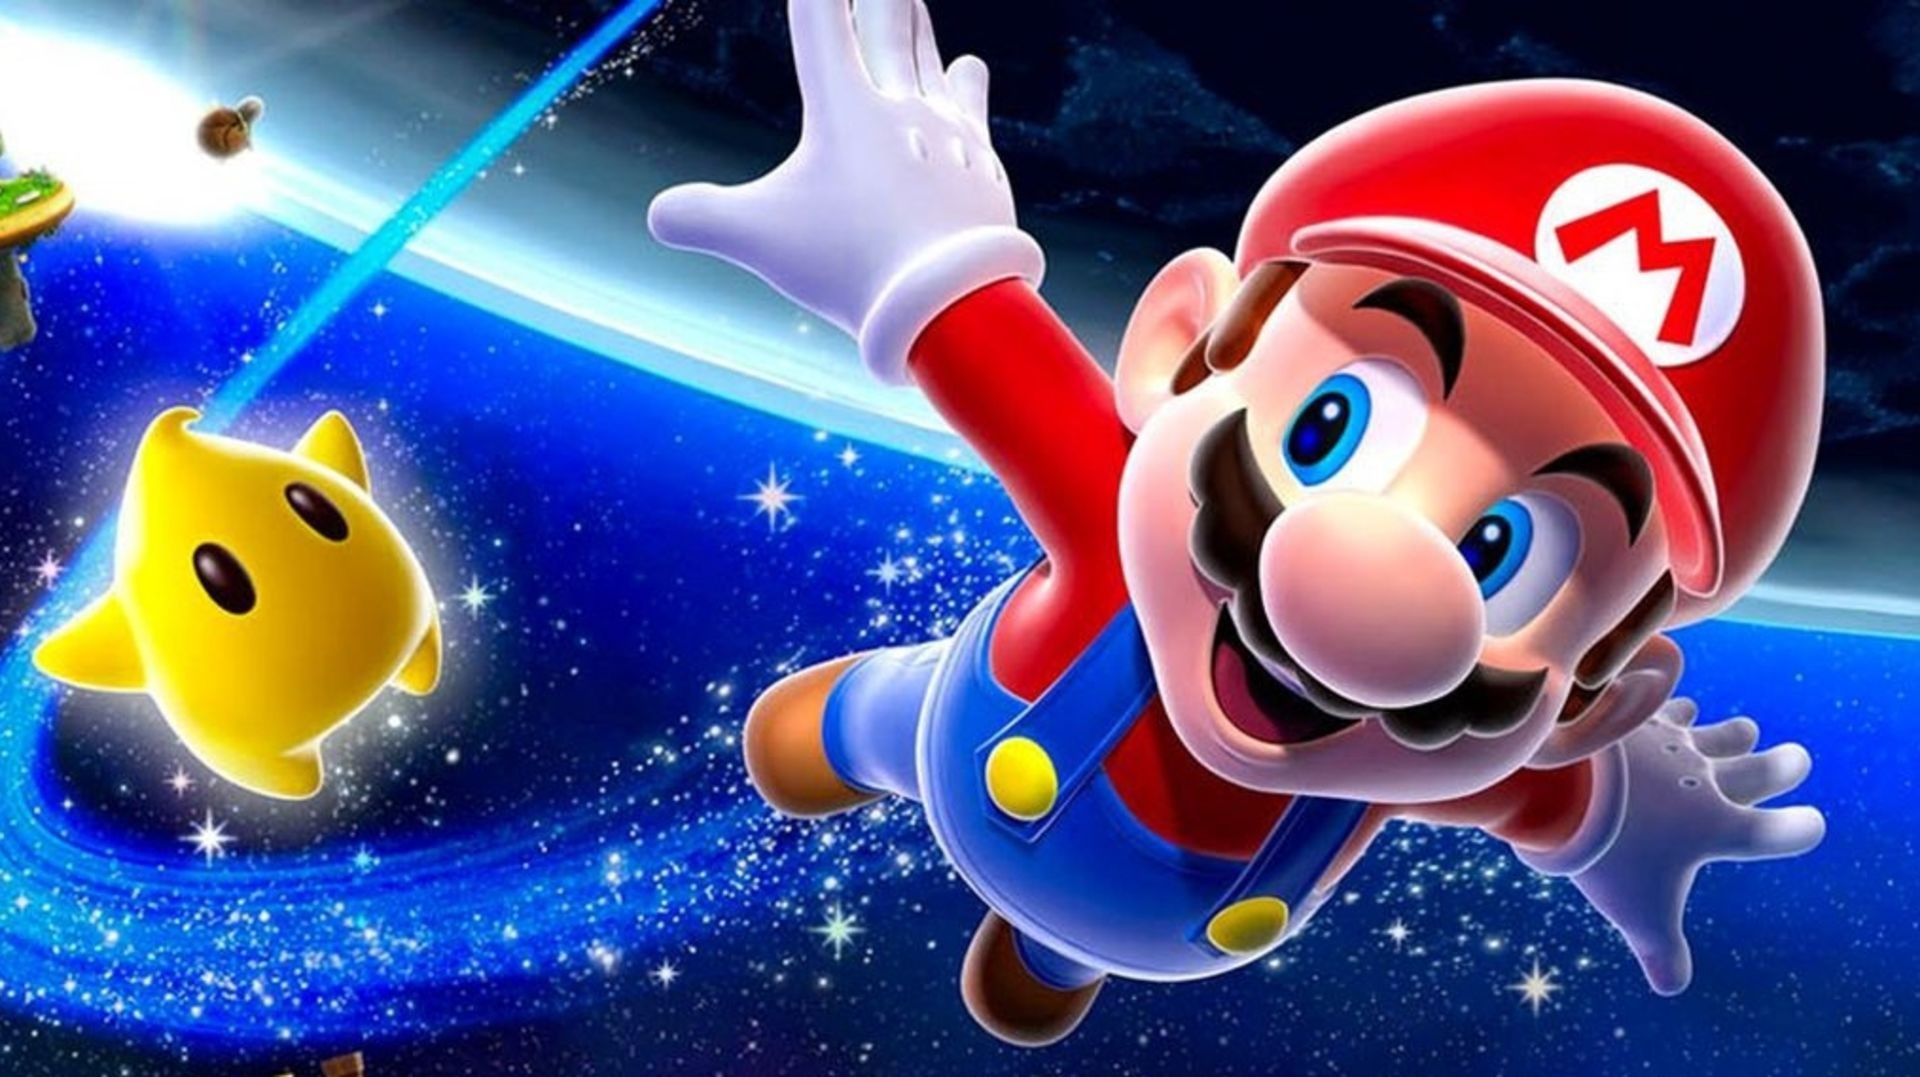 when is super mario galaxy 3 coming out